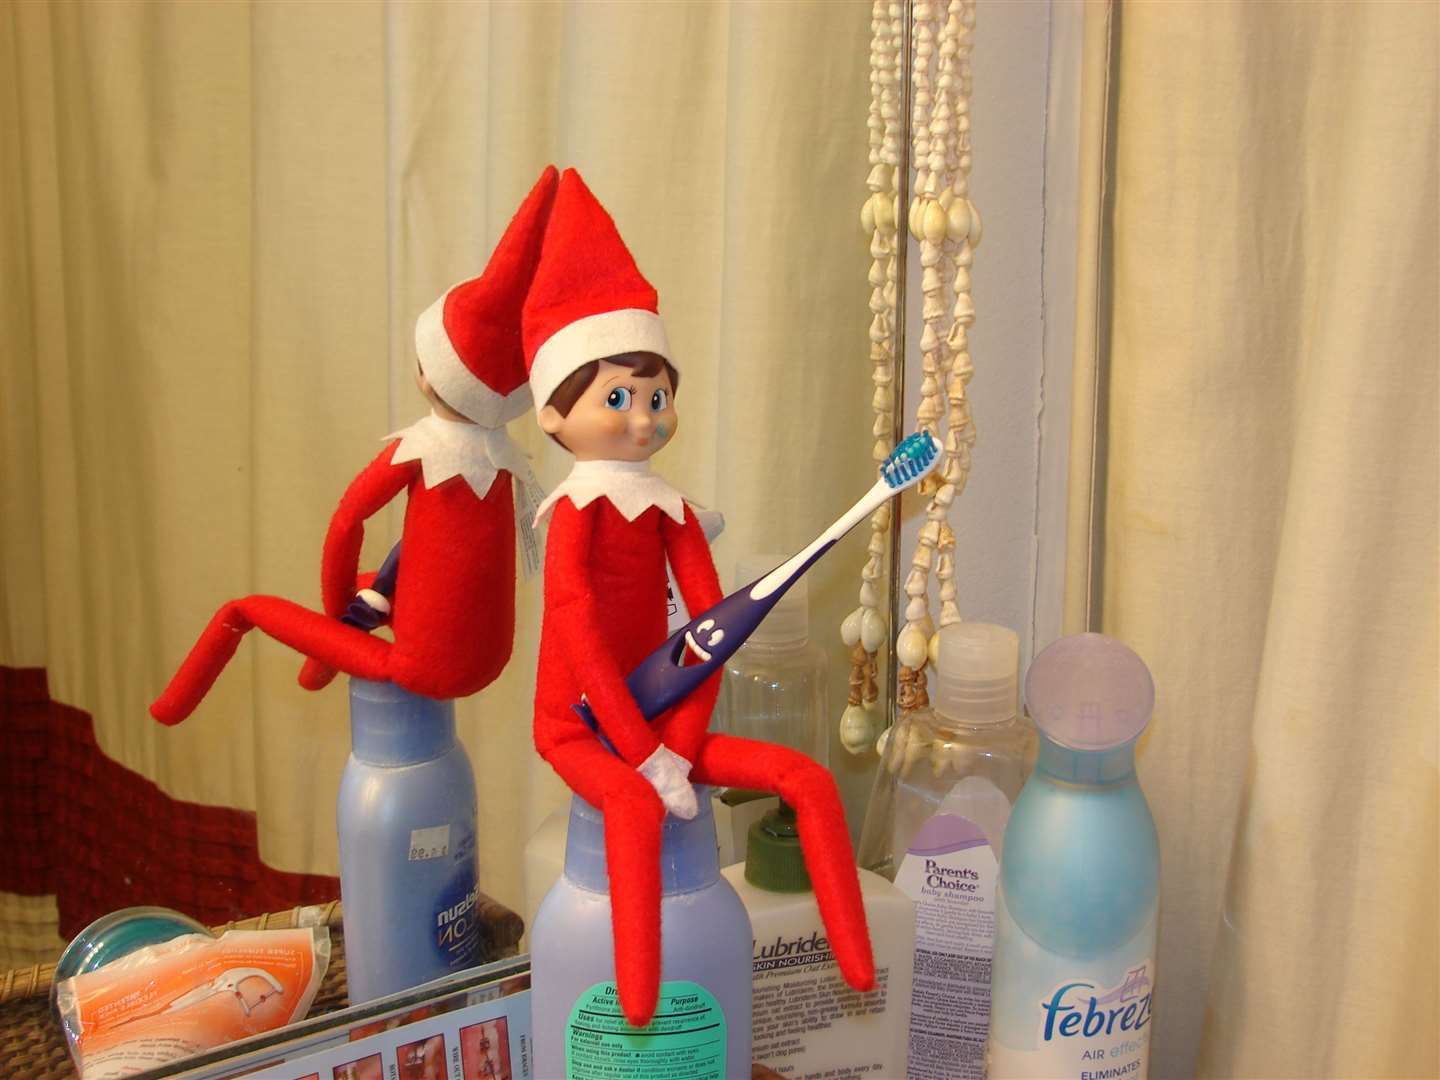 Be prepared for your elf to move around your home when you aren't looking!